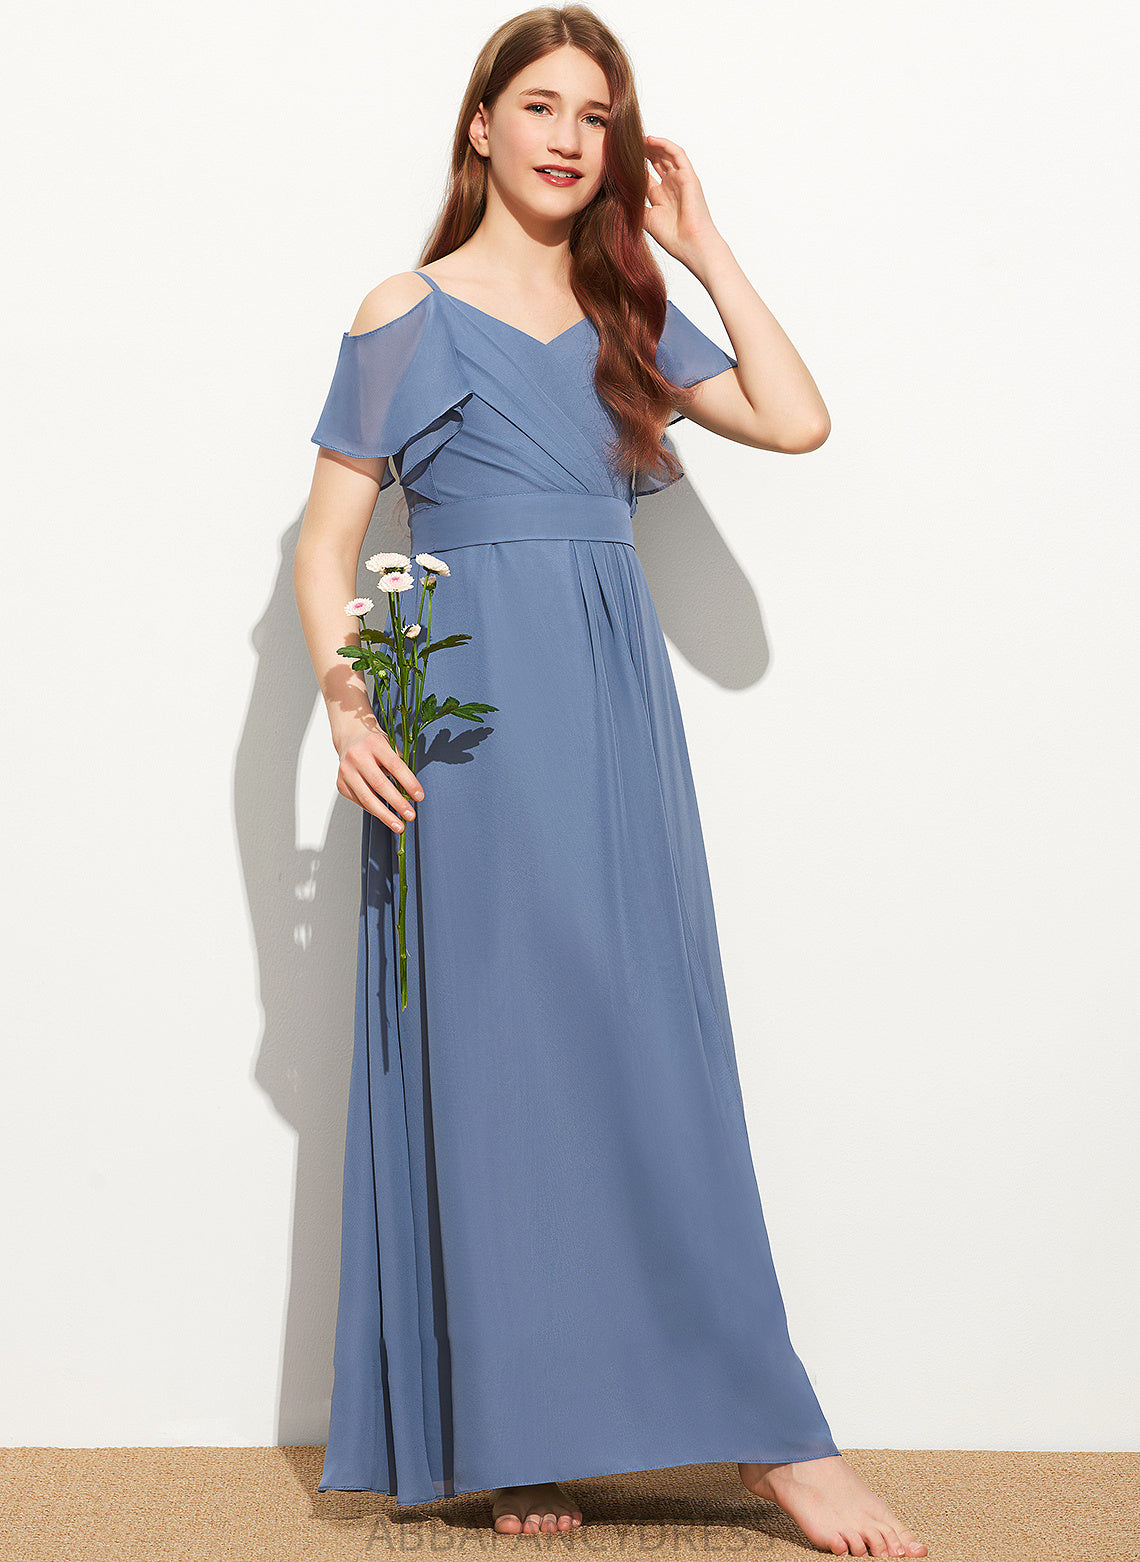 Bow(s) Chiffon Ruffle A-Line Off-the-Shoulder Floor-Length Lilith With Junior Bridesmaid Dresses